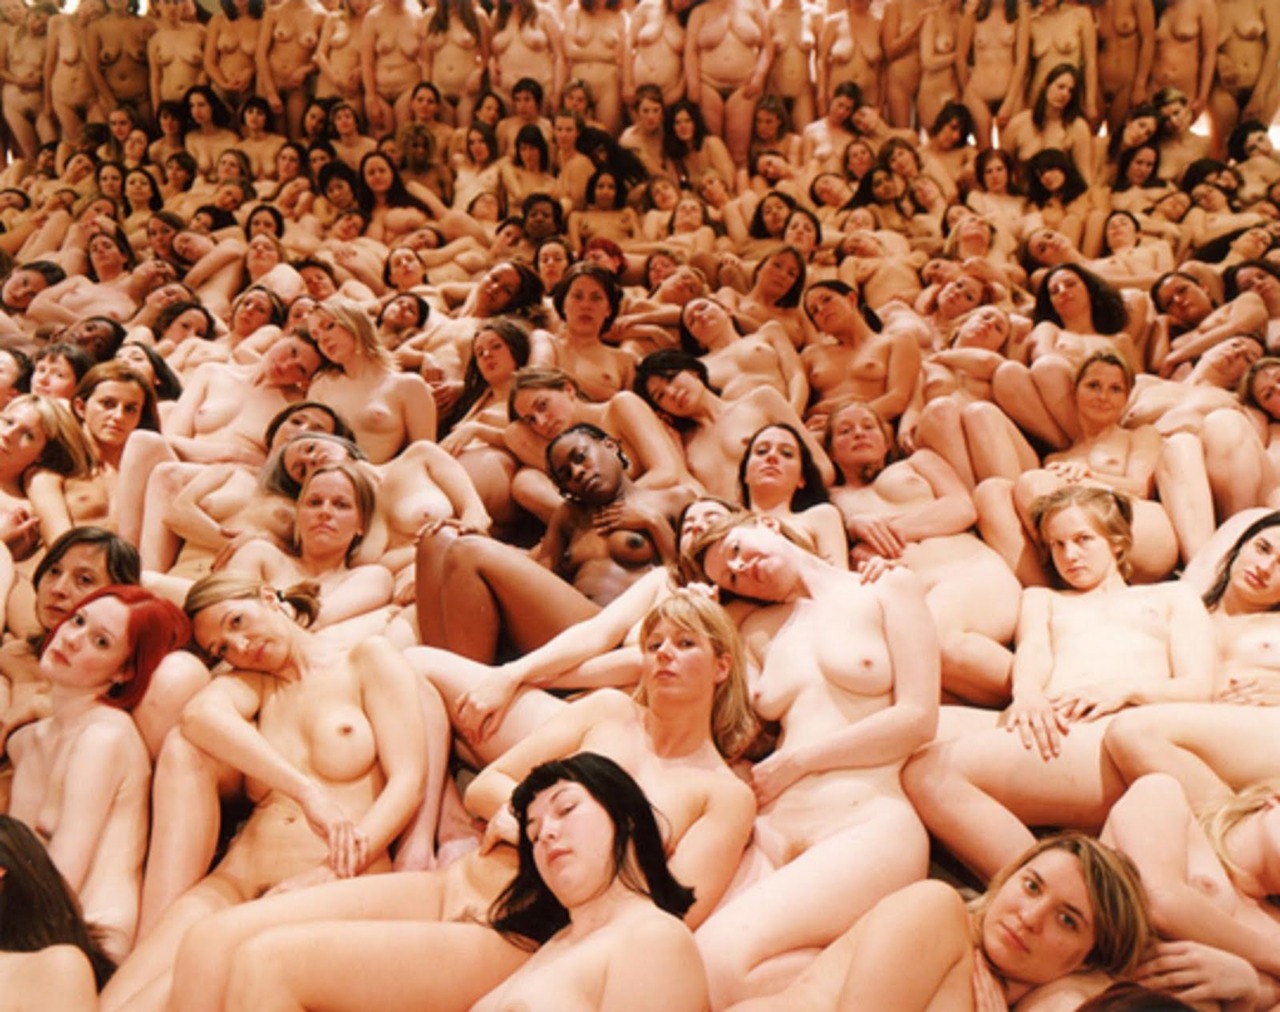 The biggest naked women in the world